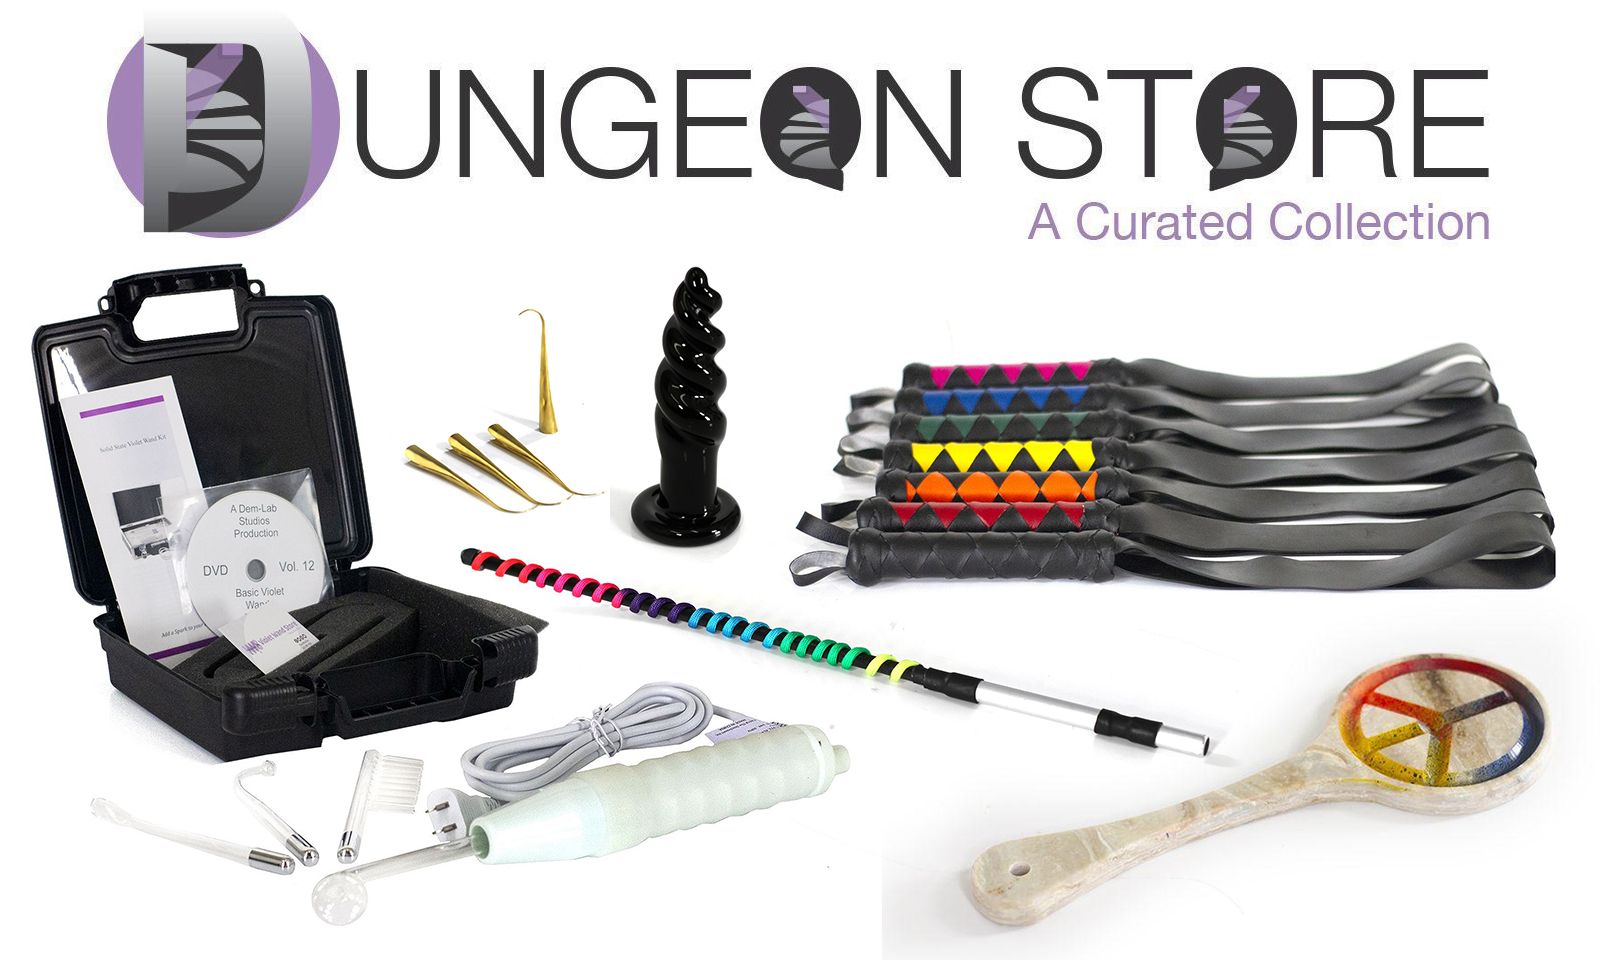 The Dungeon Store to Demonstrate Violet Wands at Exxxotica